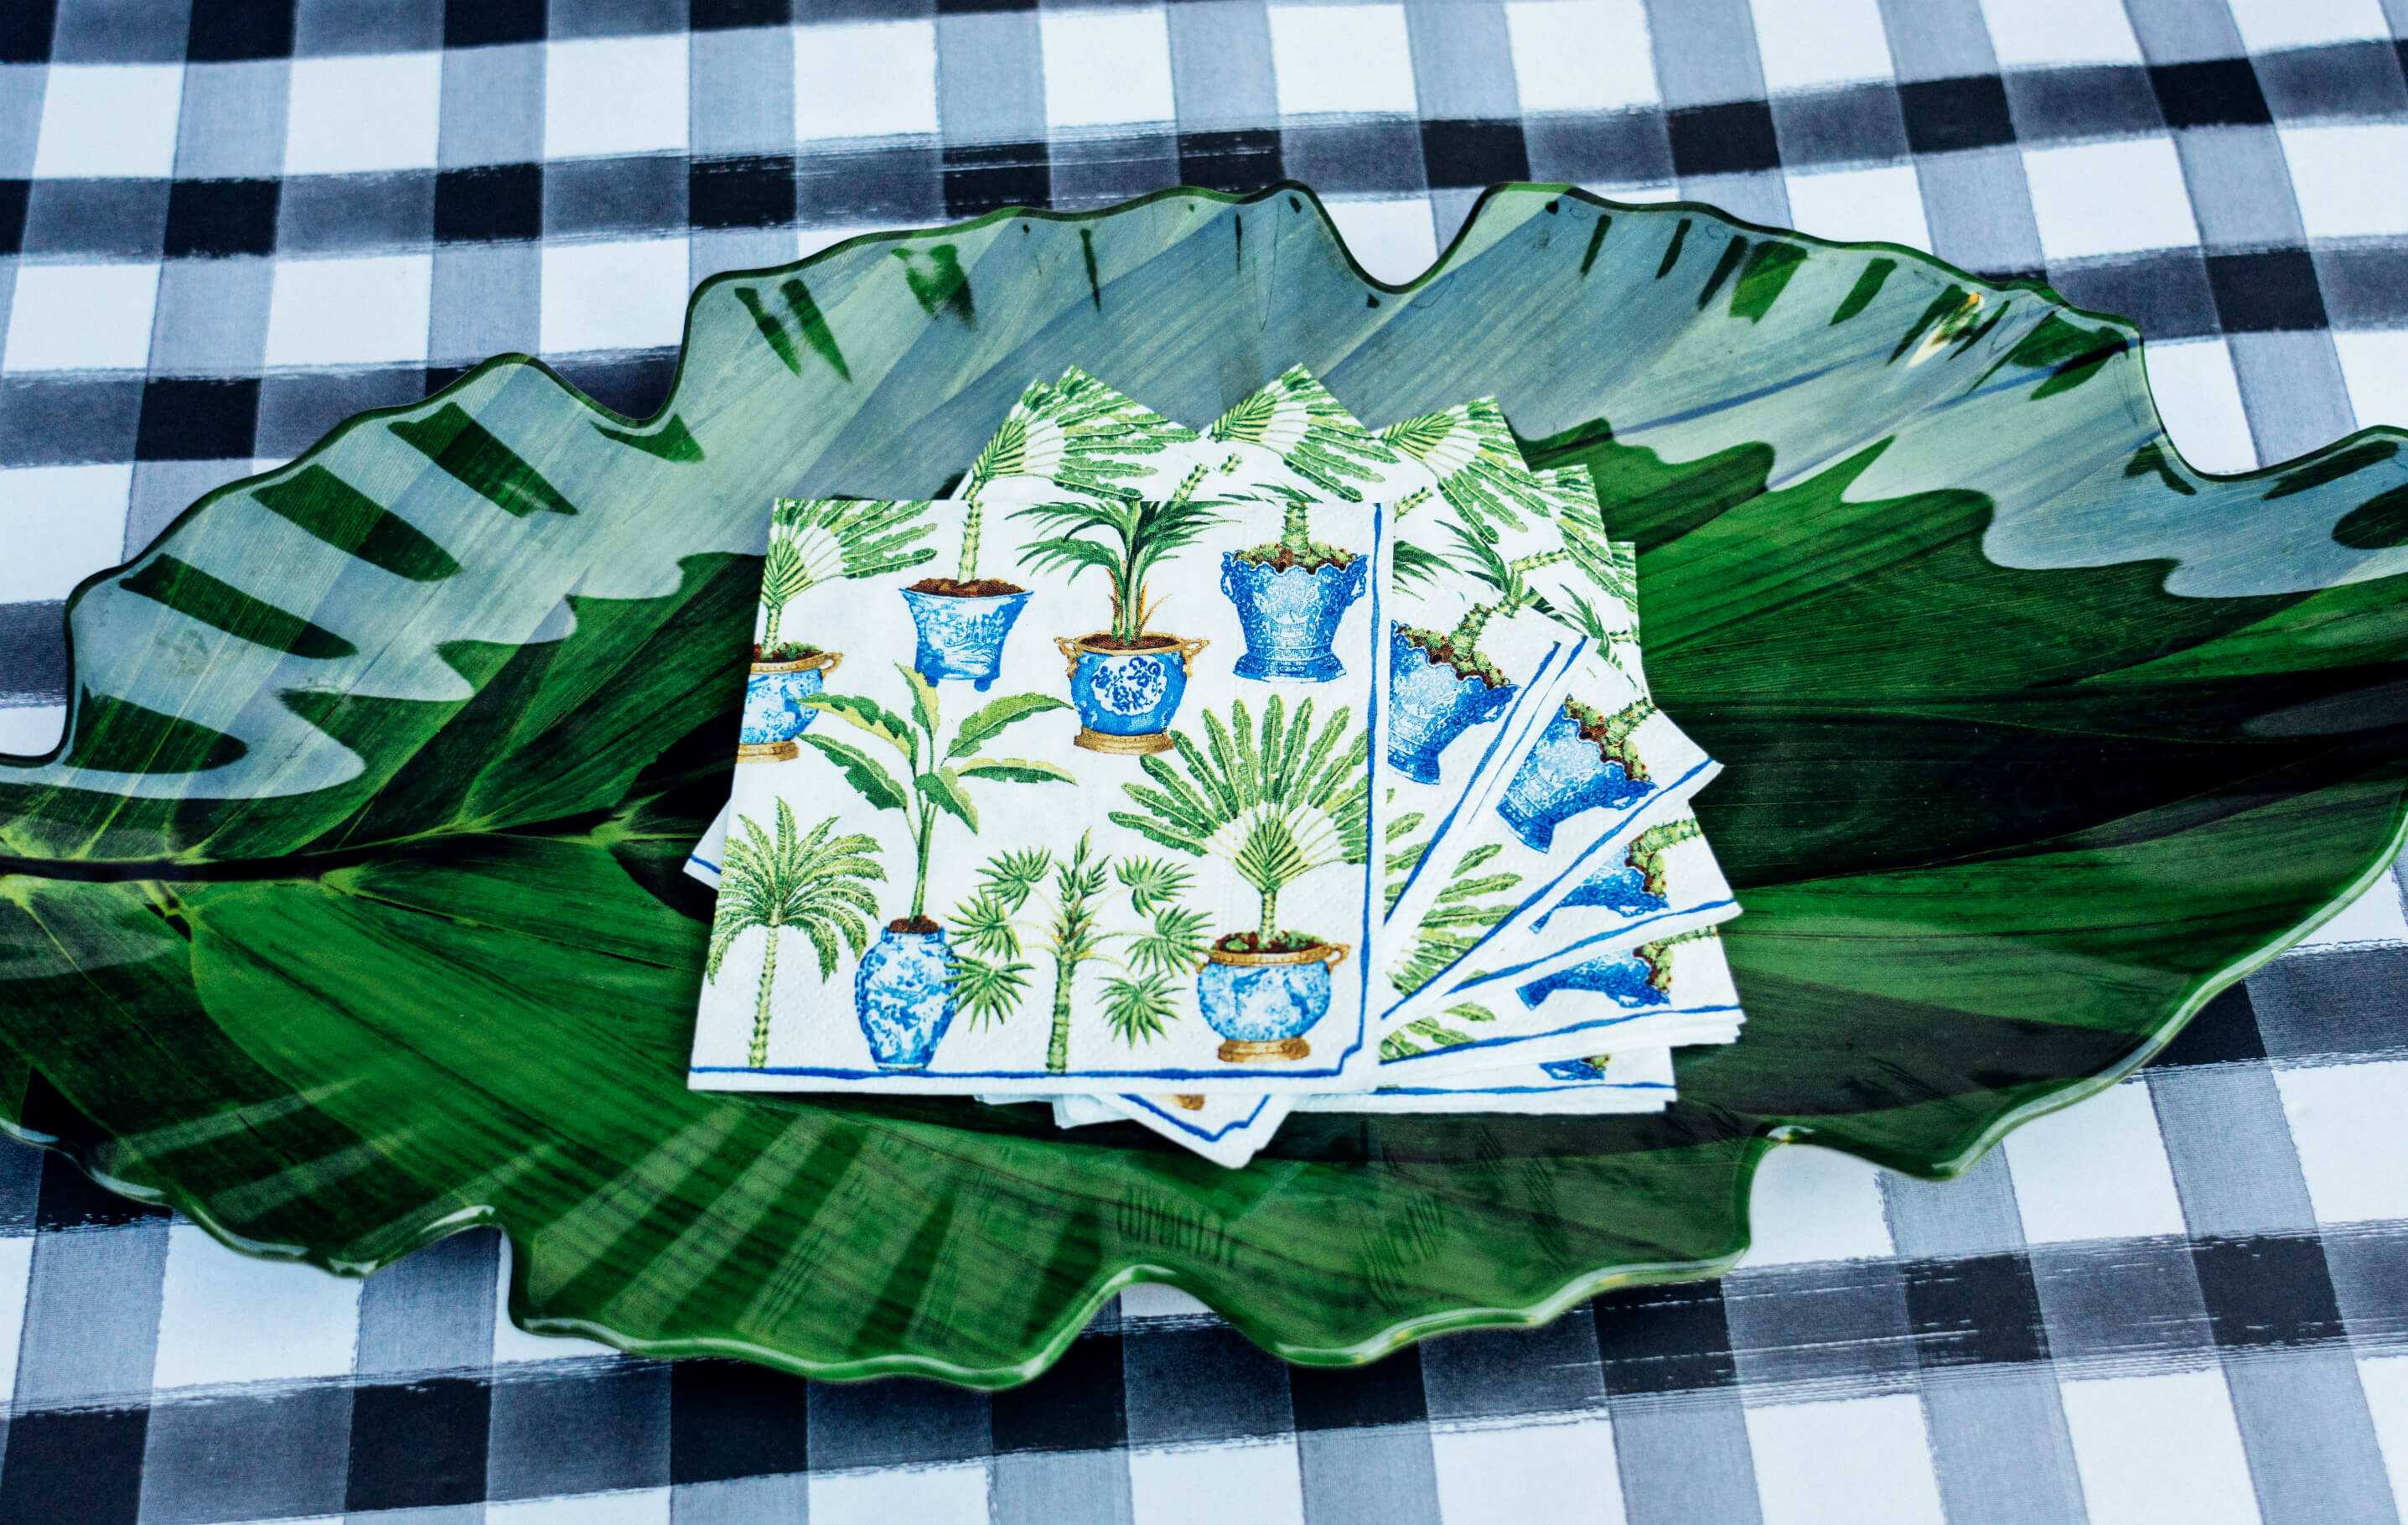 Outdoor Patio Redesign, Modern, Banana Leaf Plate, Tropical Cocktail Napkins, Gift & Kitchen Essentials at Sickles Market, Tilden of To Be Bright